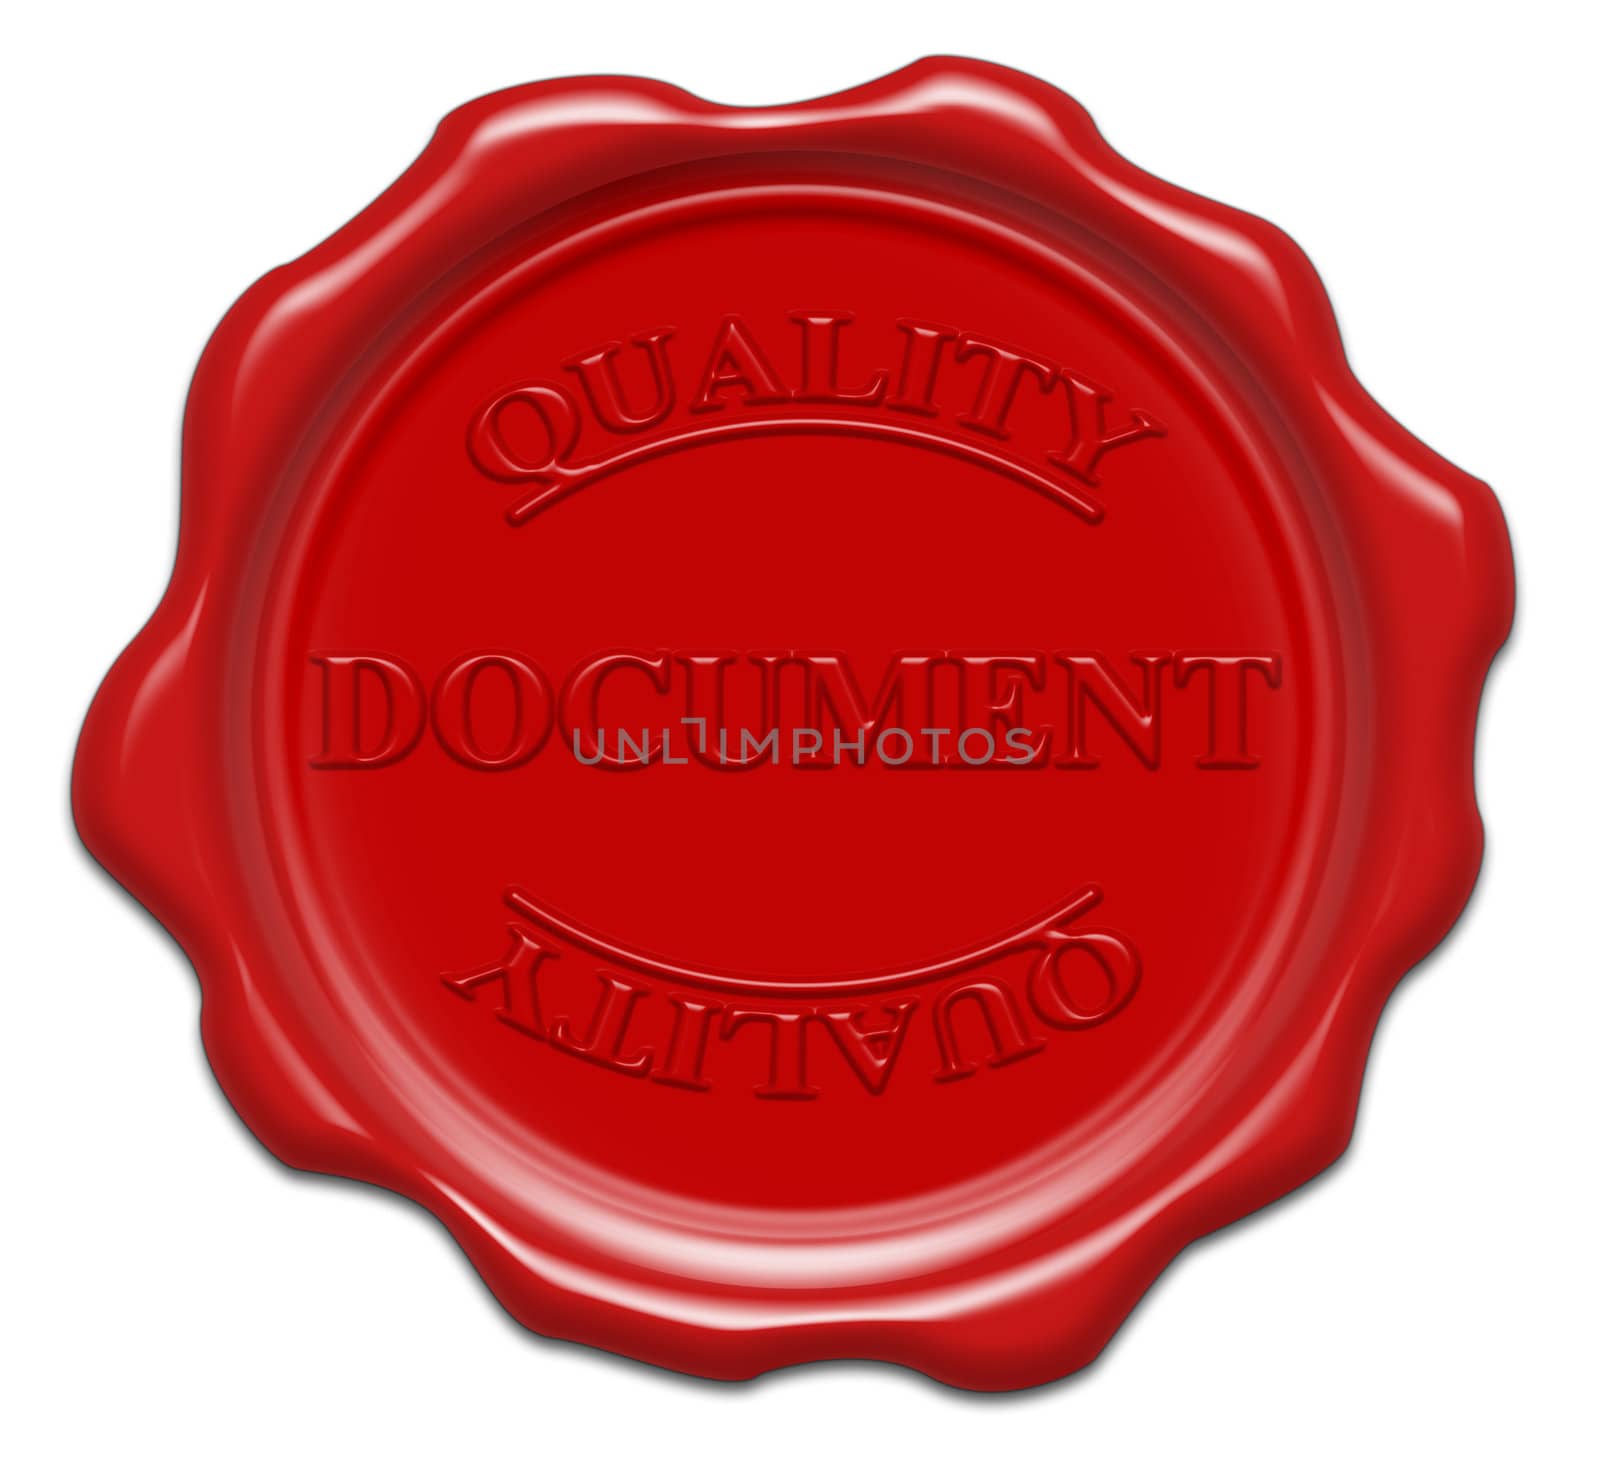 quality document - illustration red wax seal isolated on white background with word : document